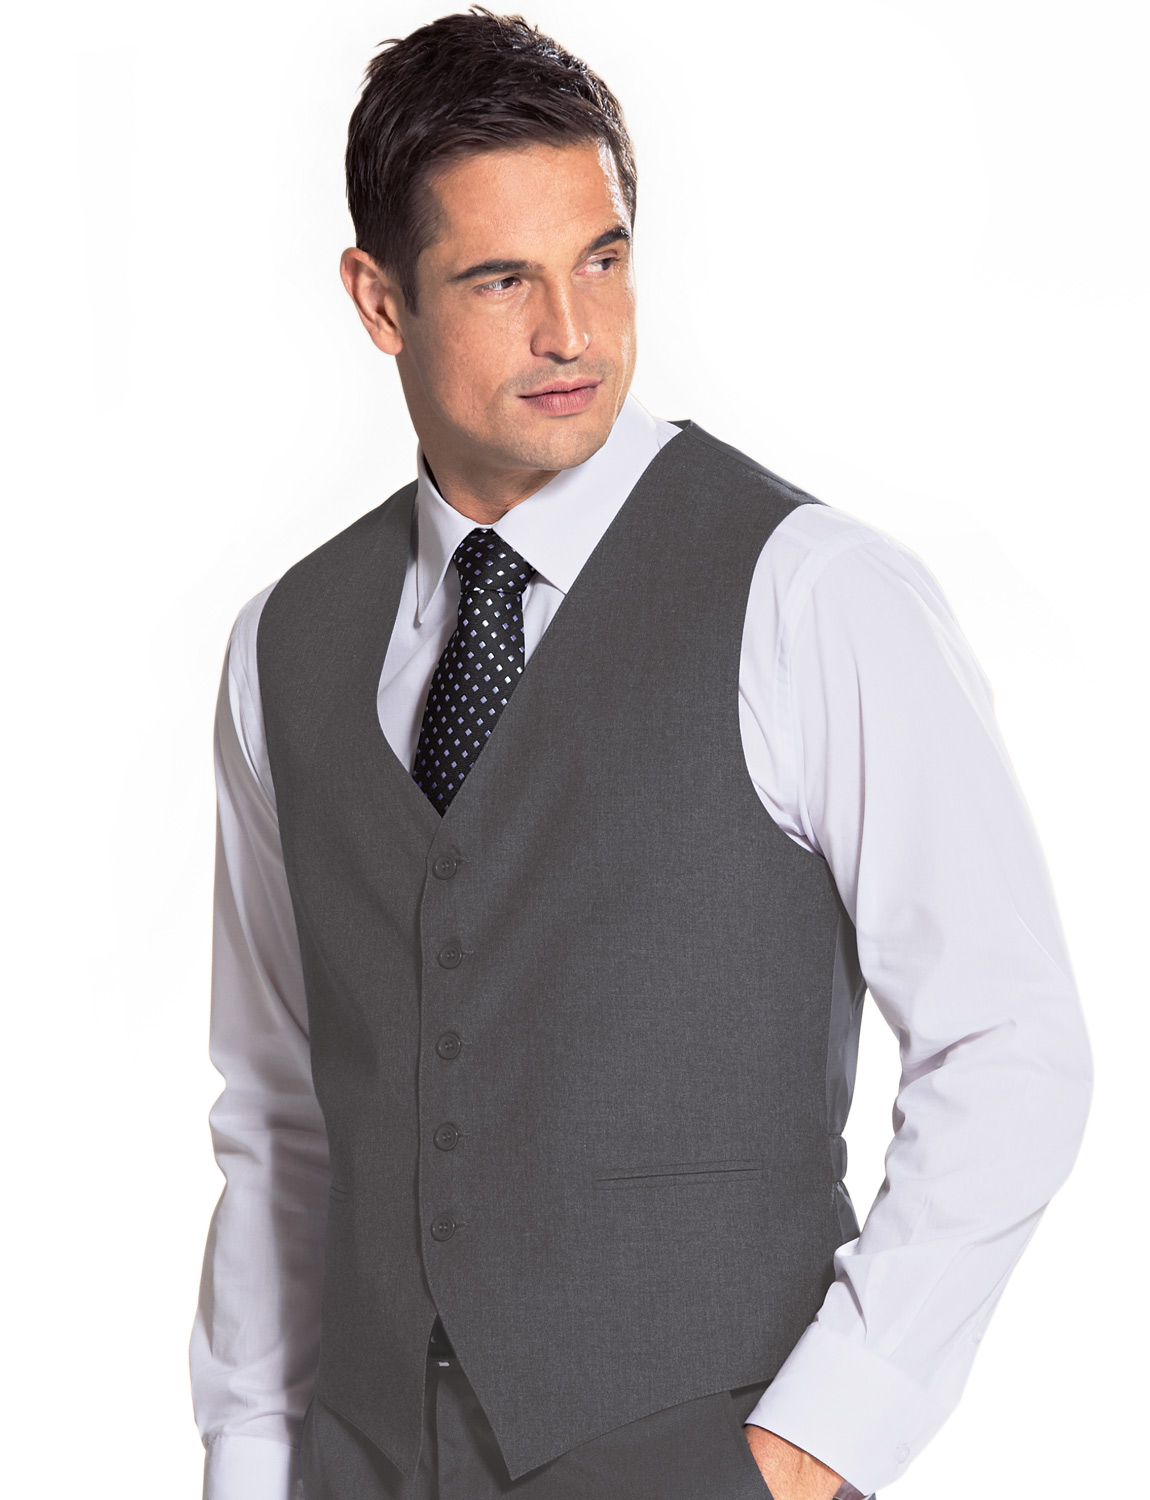 Mens Suit Waistcoat - Mix And Match | eBay